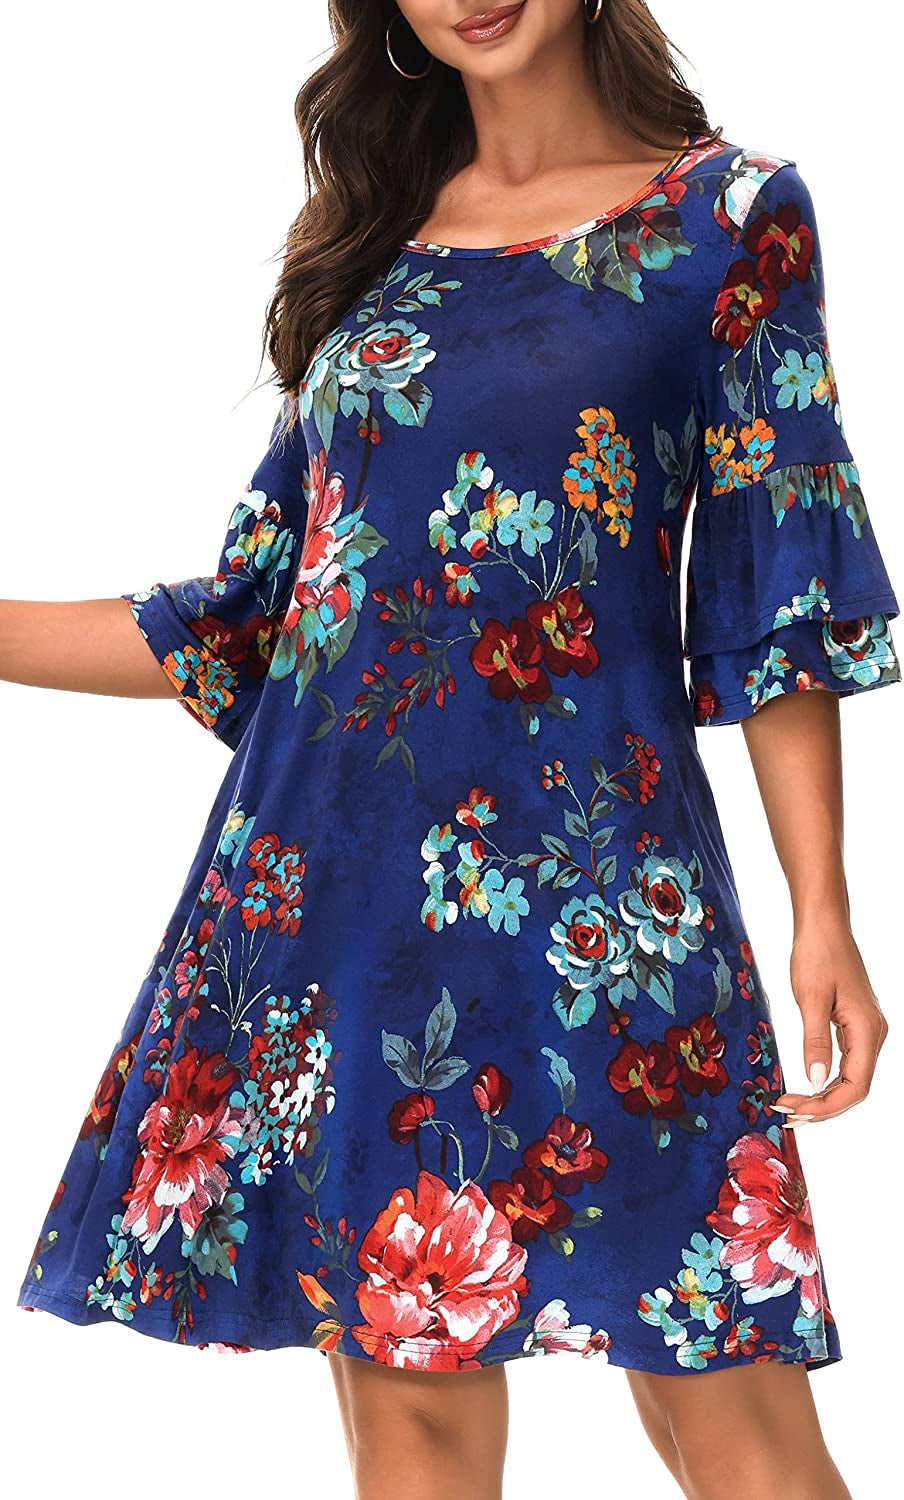  Summer Casual T-Shirt Dresses for Women Loose Fit Comfy Short Sleeves Women Dresses with Pockets Fall Dress